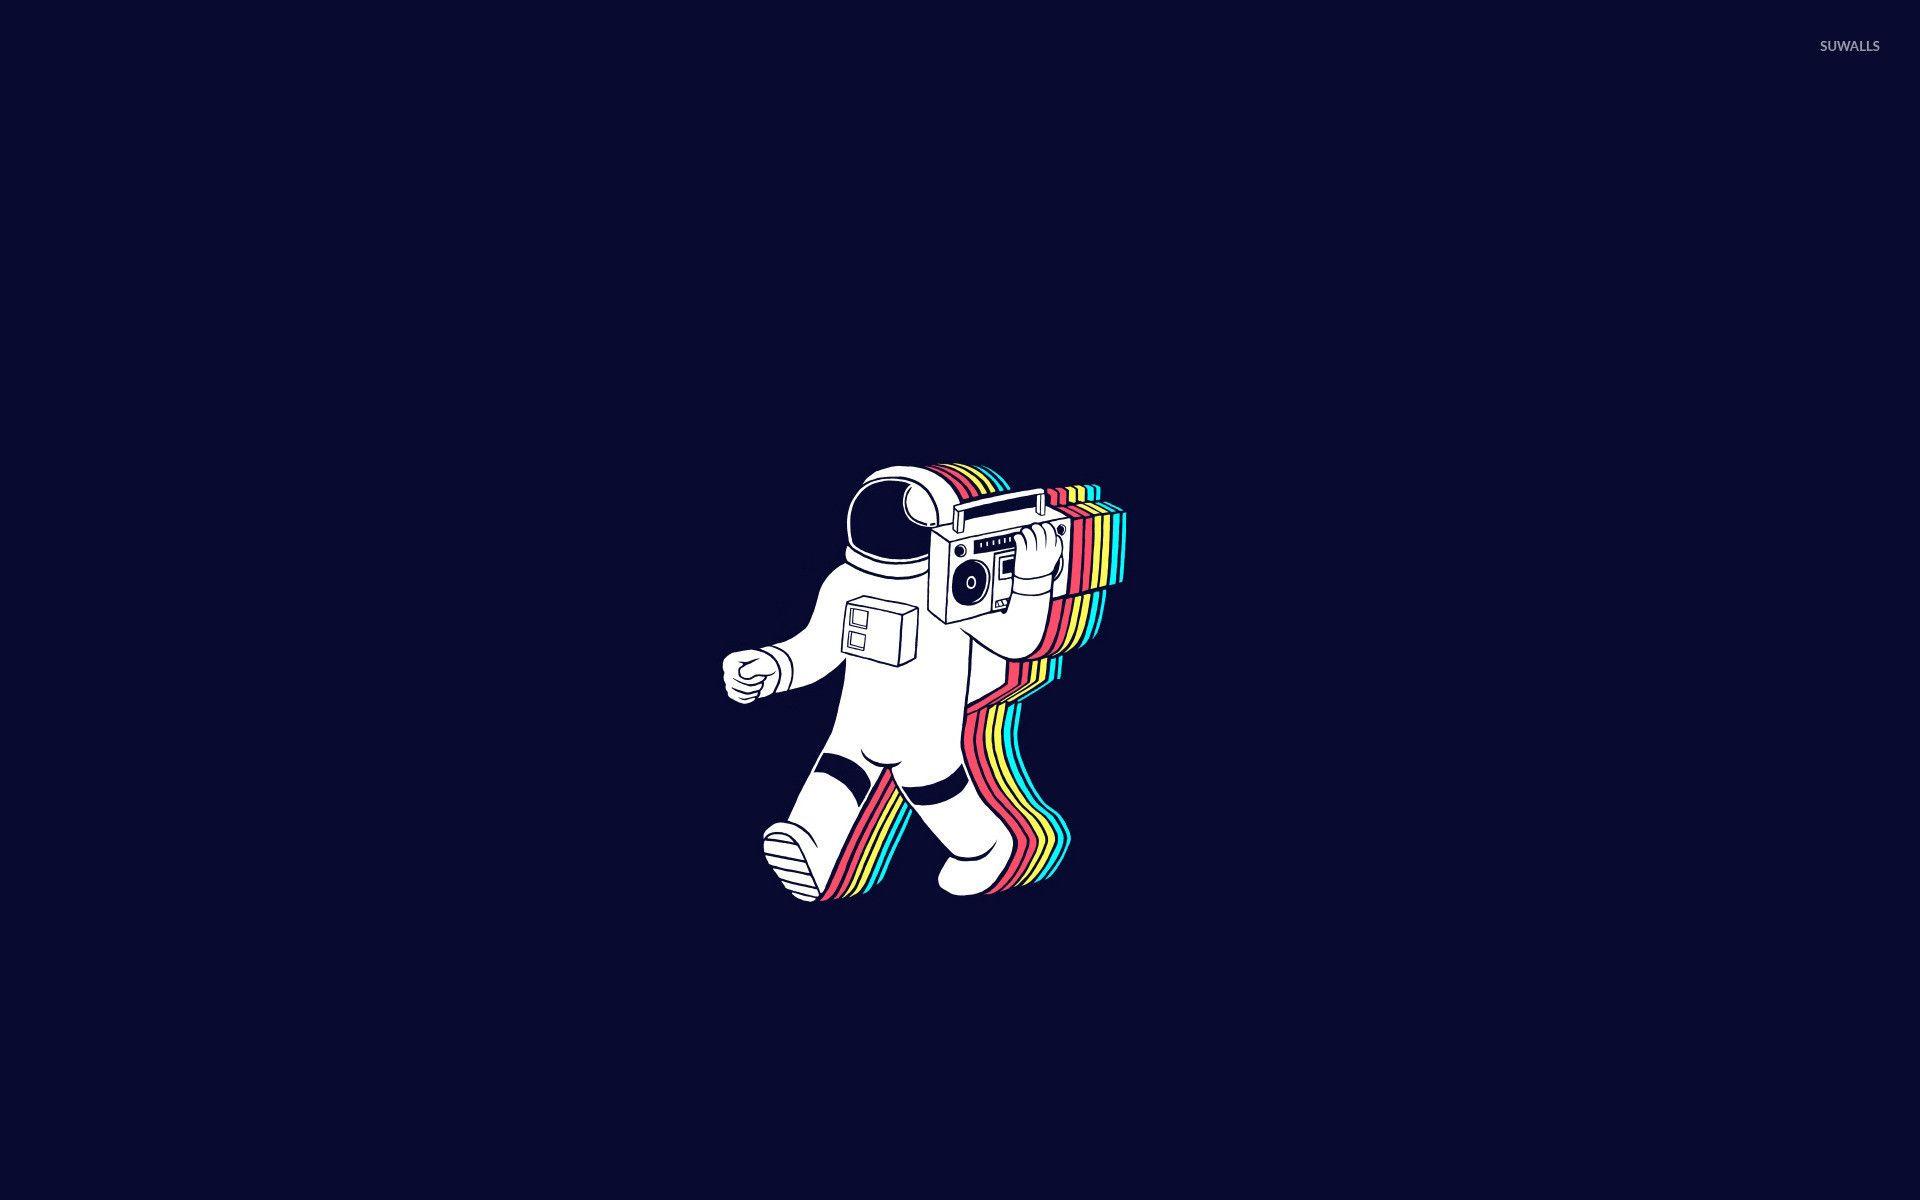 Psychedelic Astronaut Wallpapers - Wallpaper Cave